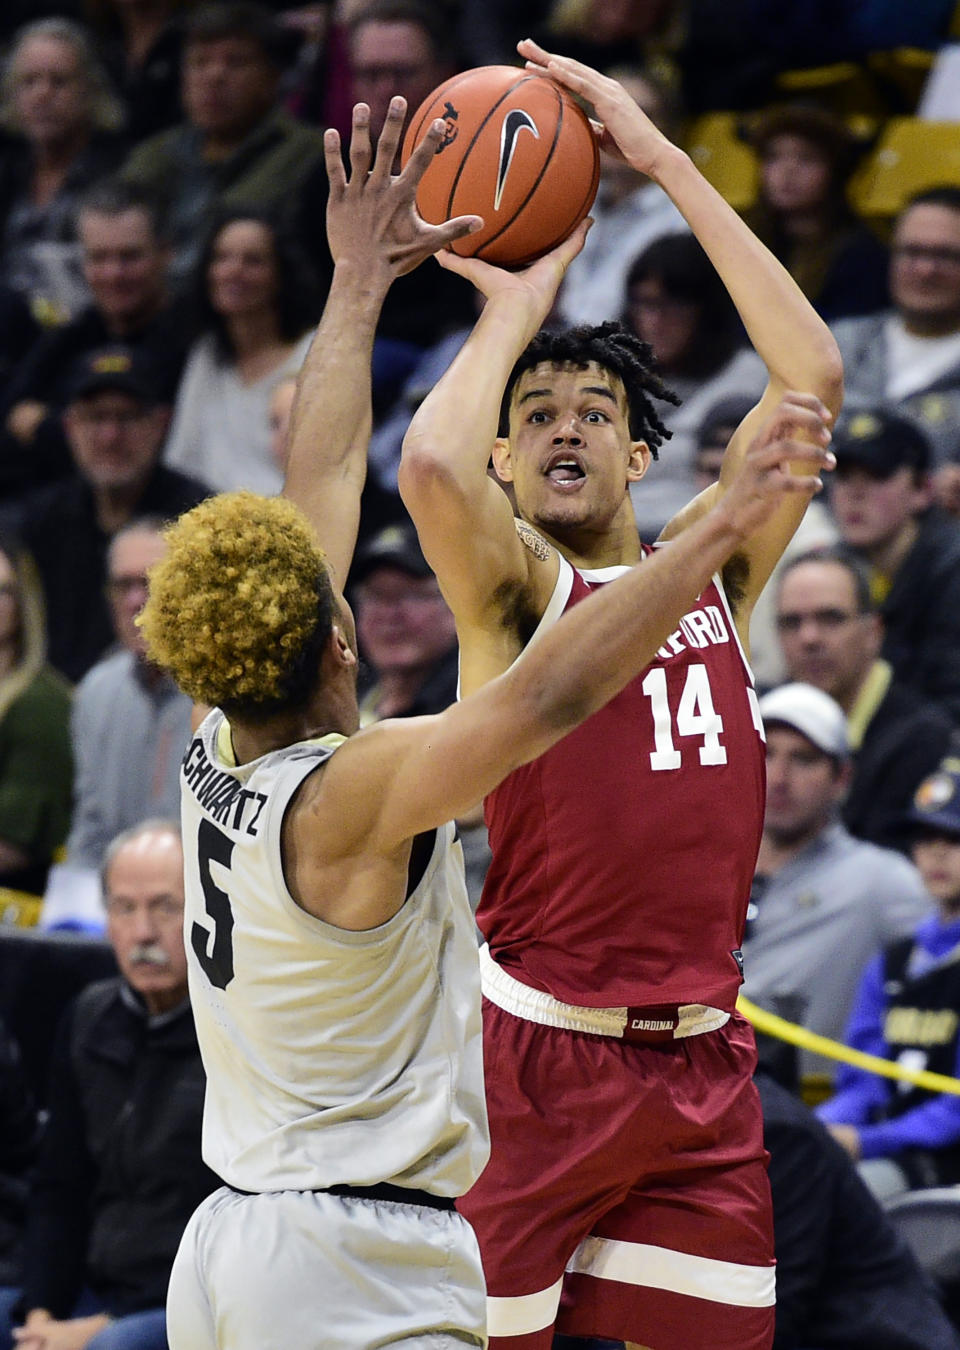 Stanford's Spencer Jones shoots over Colorado's D'Shawn Schwartz during the first half of an NCAA college basketball game Saturday, Feb. 8, 2020, in Boulder, Colo. (AP Photo/ Cliff Grassmick)